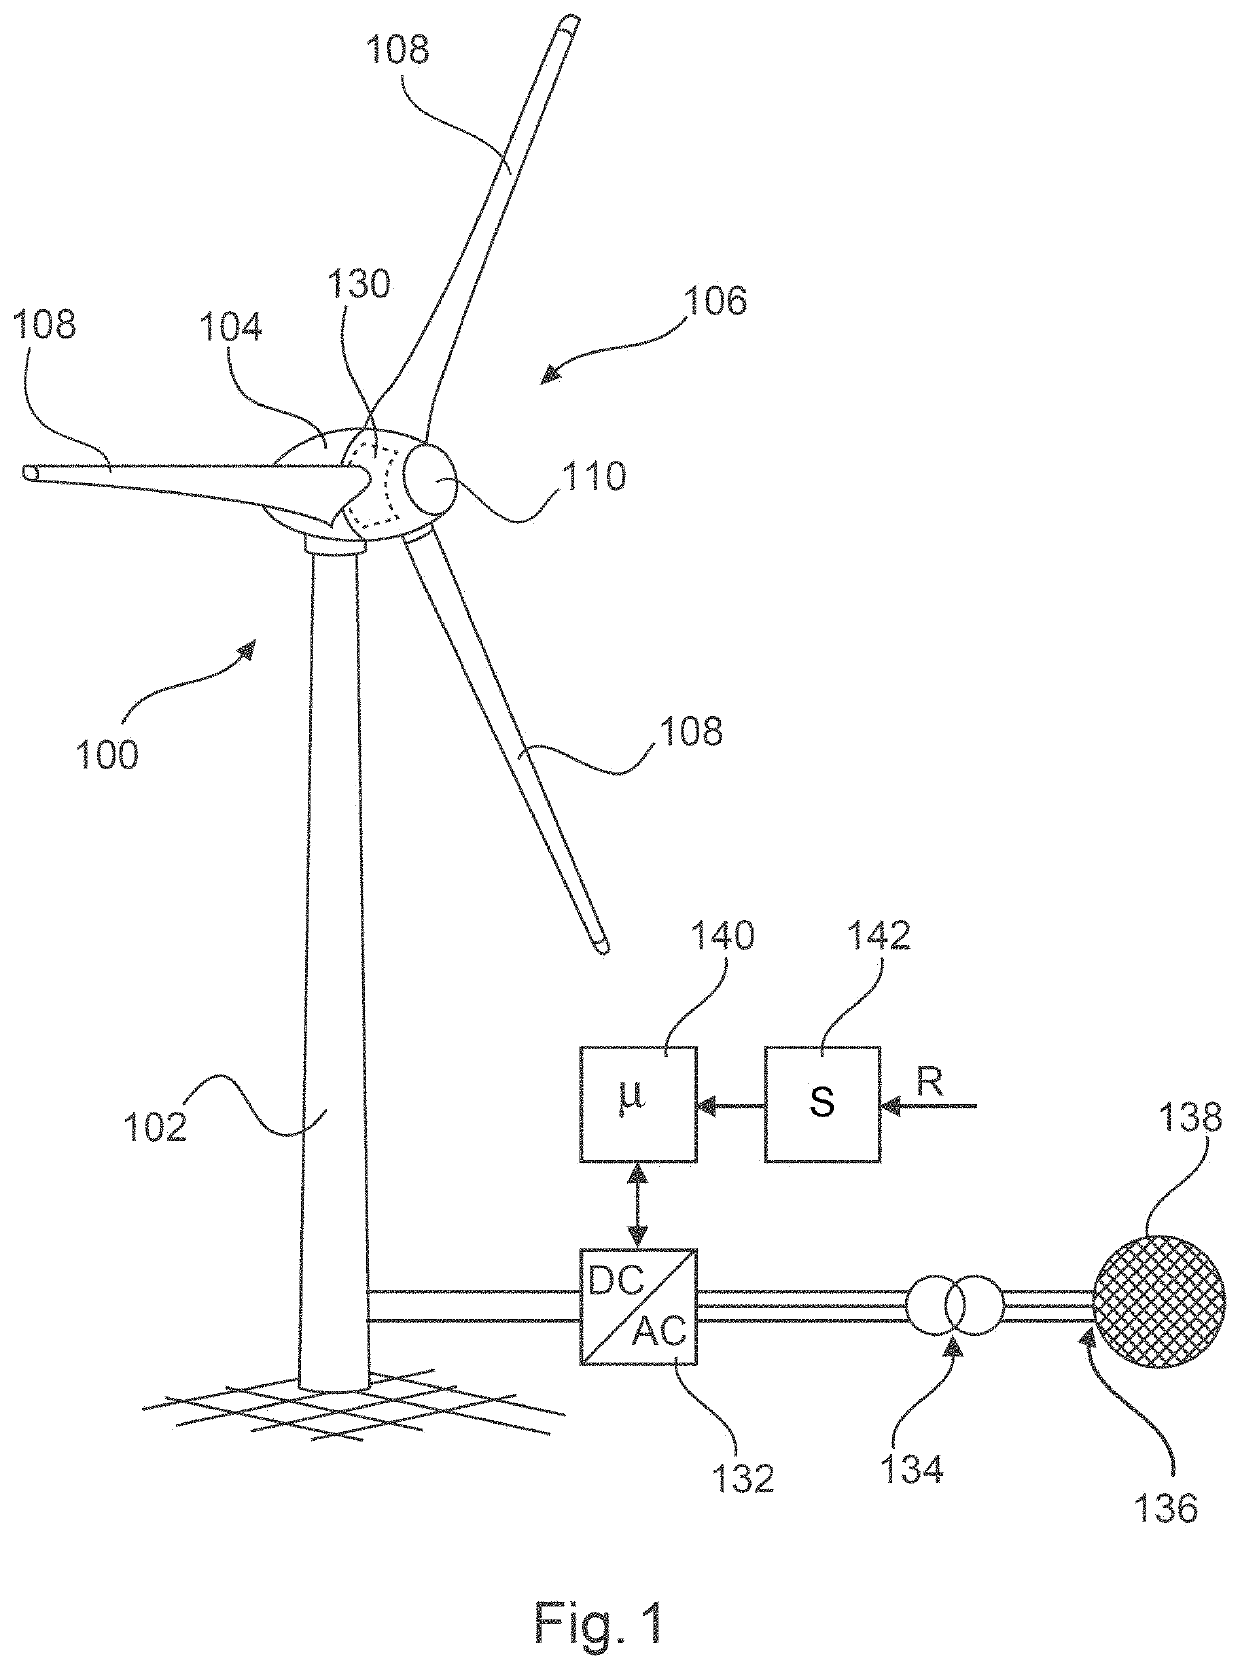 Reduced power operation of a wind turbine